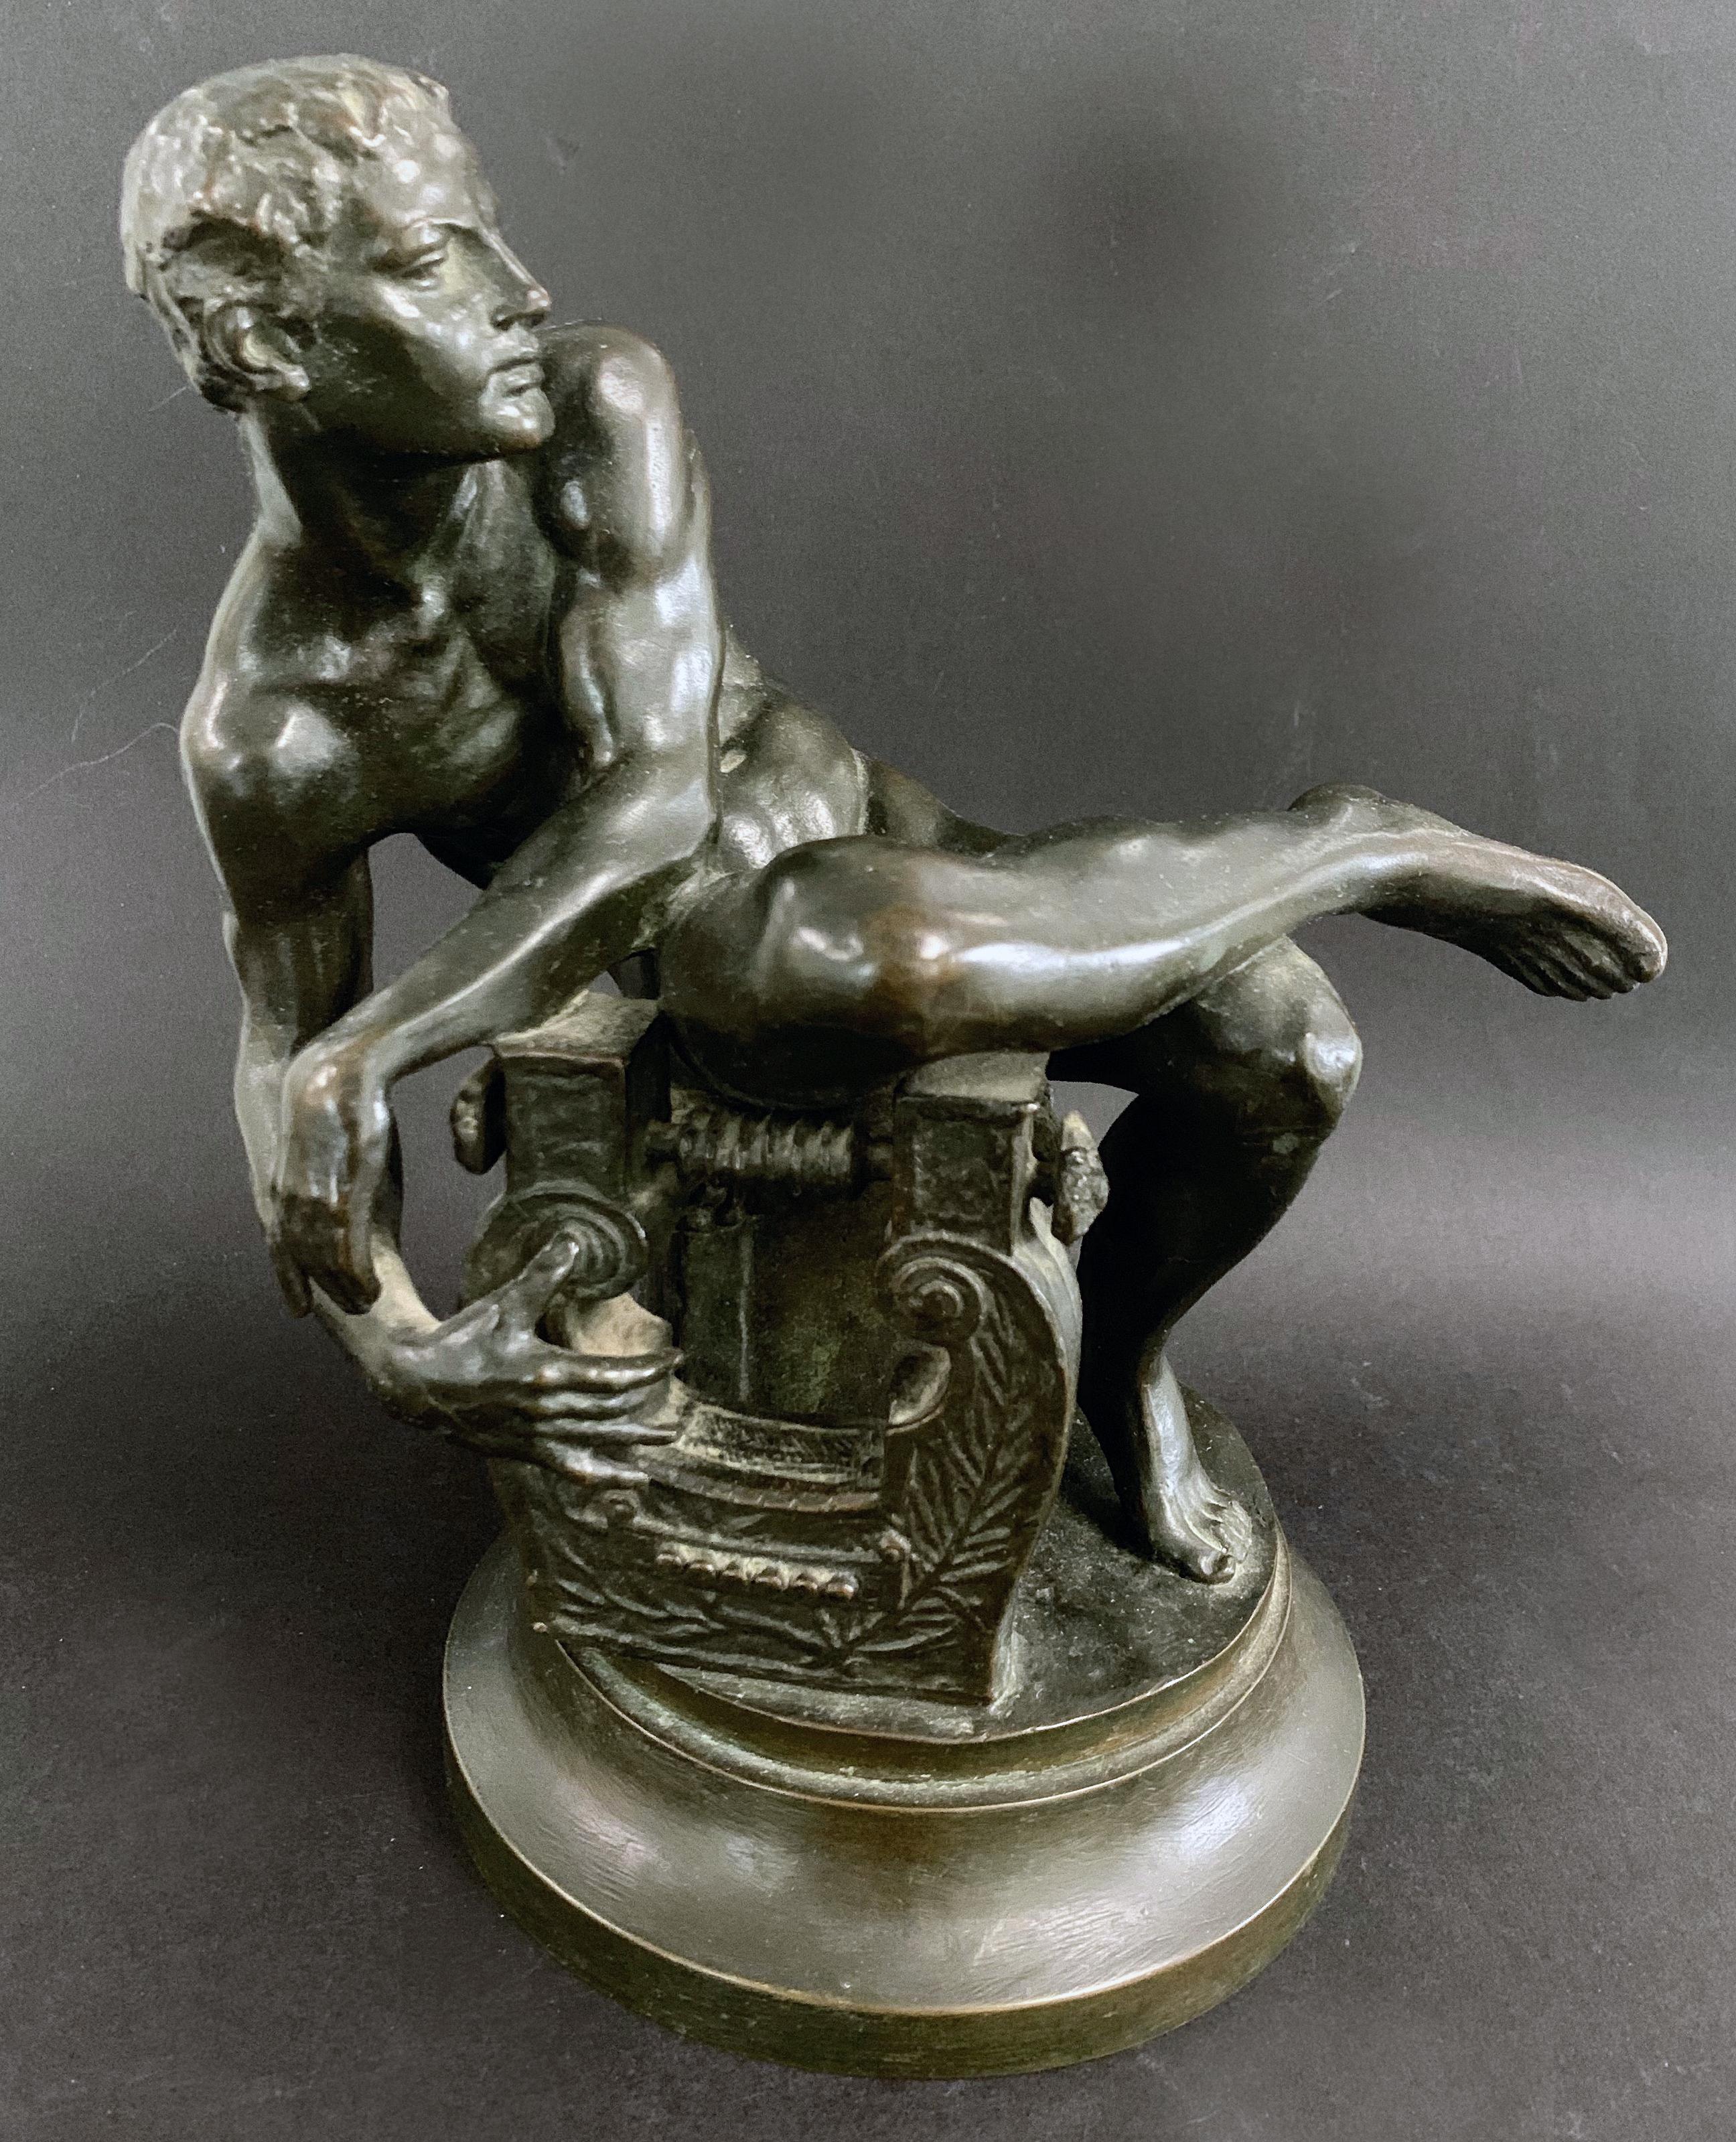 Masterfully conceived and executed, this highly rare, perhaps unique, bronze sculpture captures a young male nude figure twisting to his right to pluck the strings of his lyre. Perhaps a reference to Orpheus who was able to charm all living